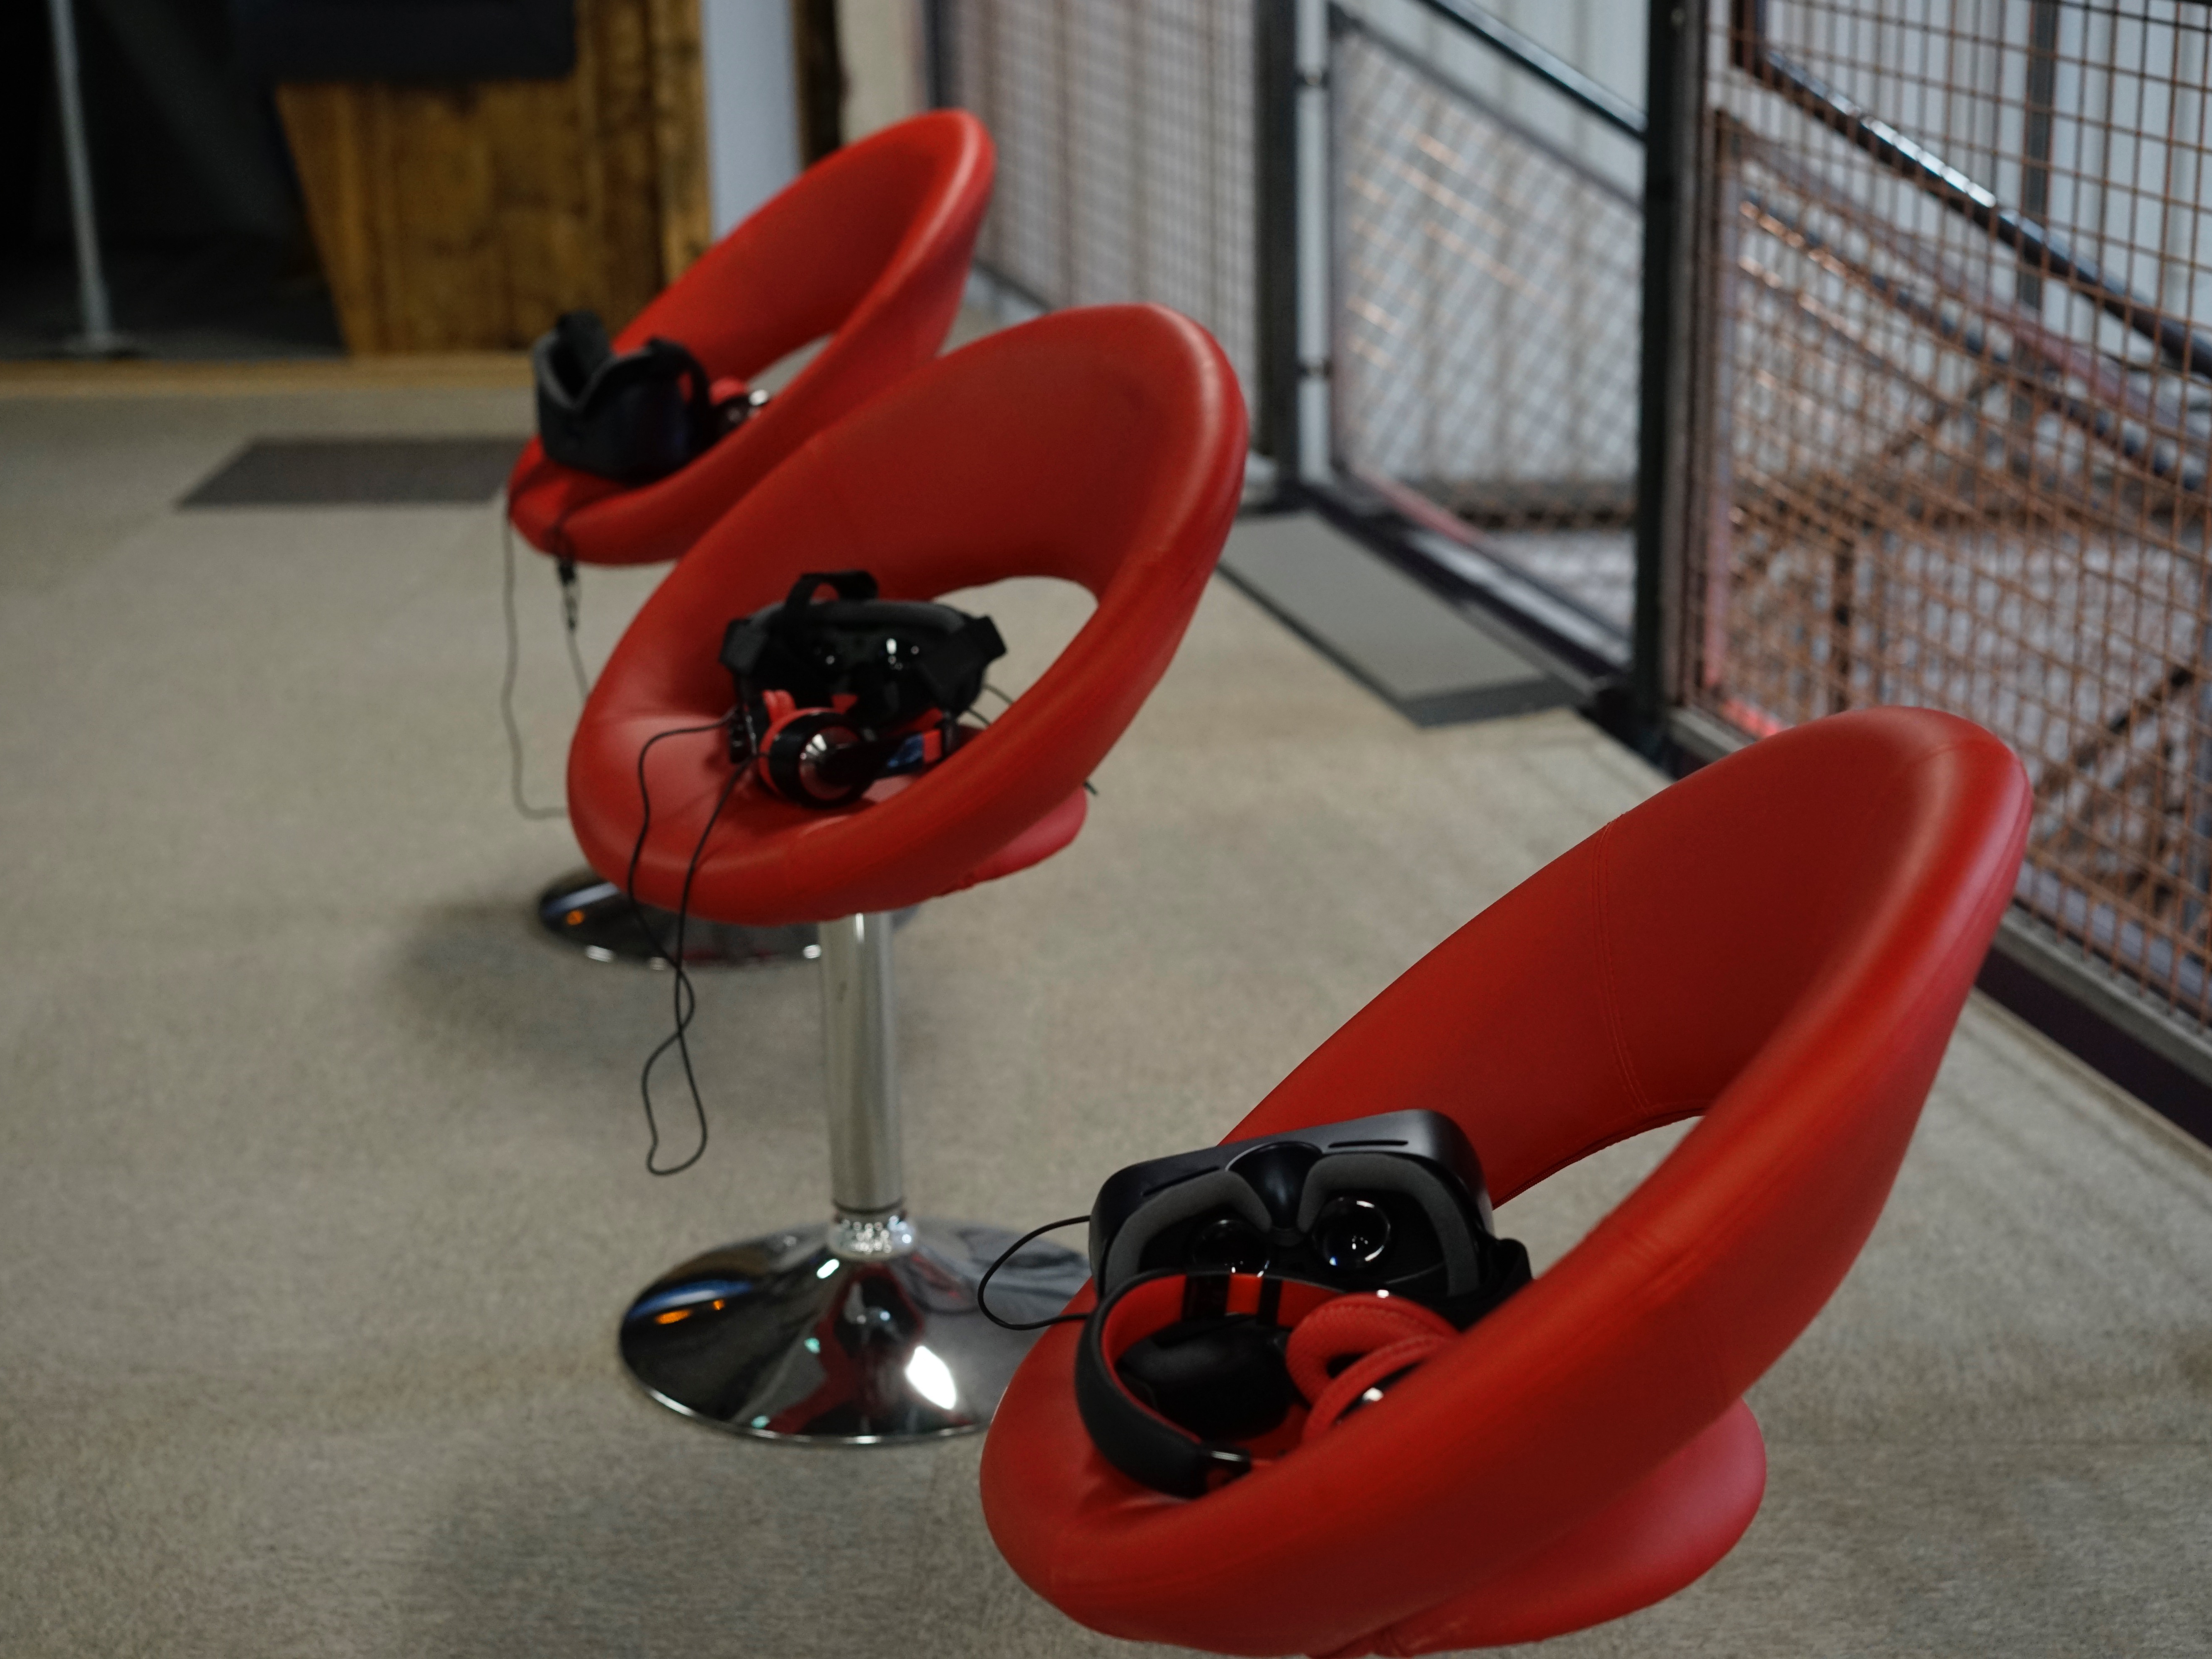 Virtual reality headsets lay on chairs in Orchard offices. Photo: Cardiff Creative